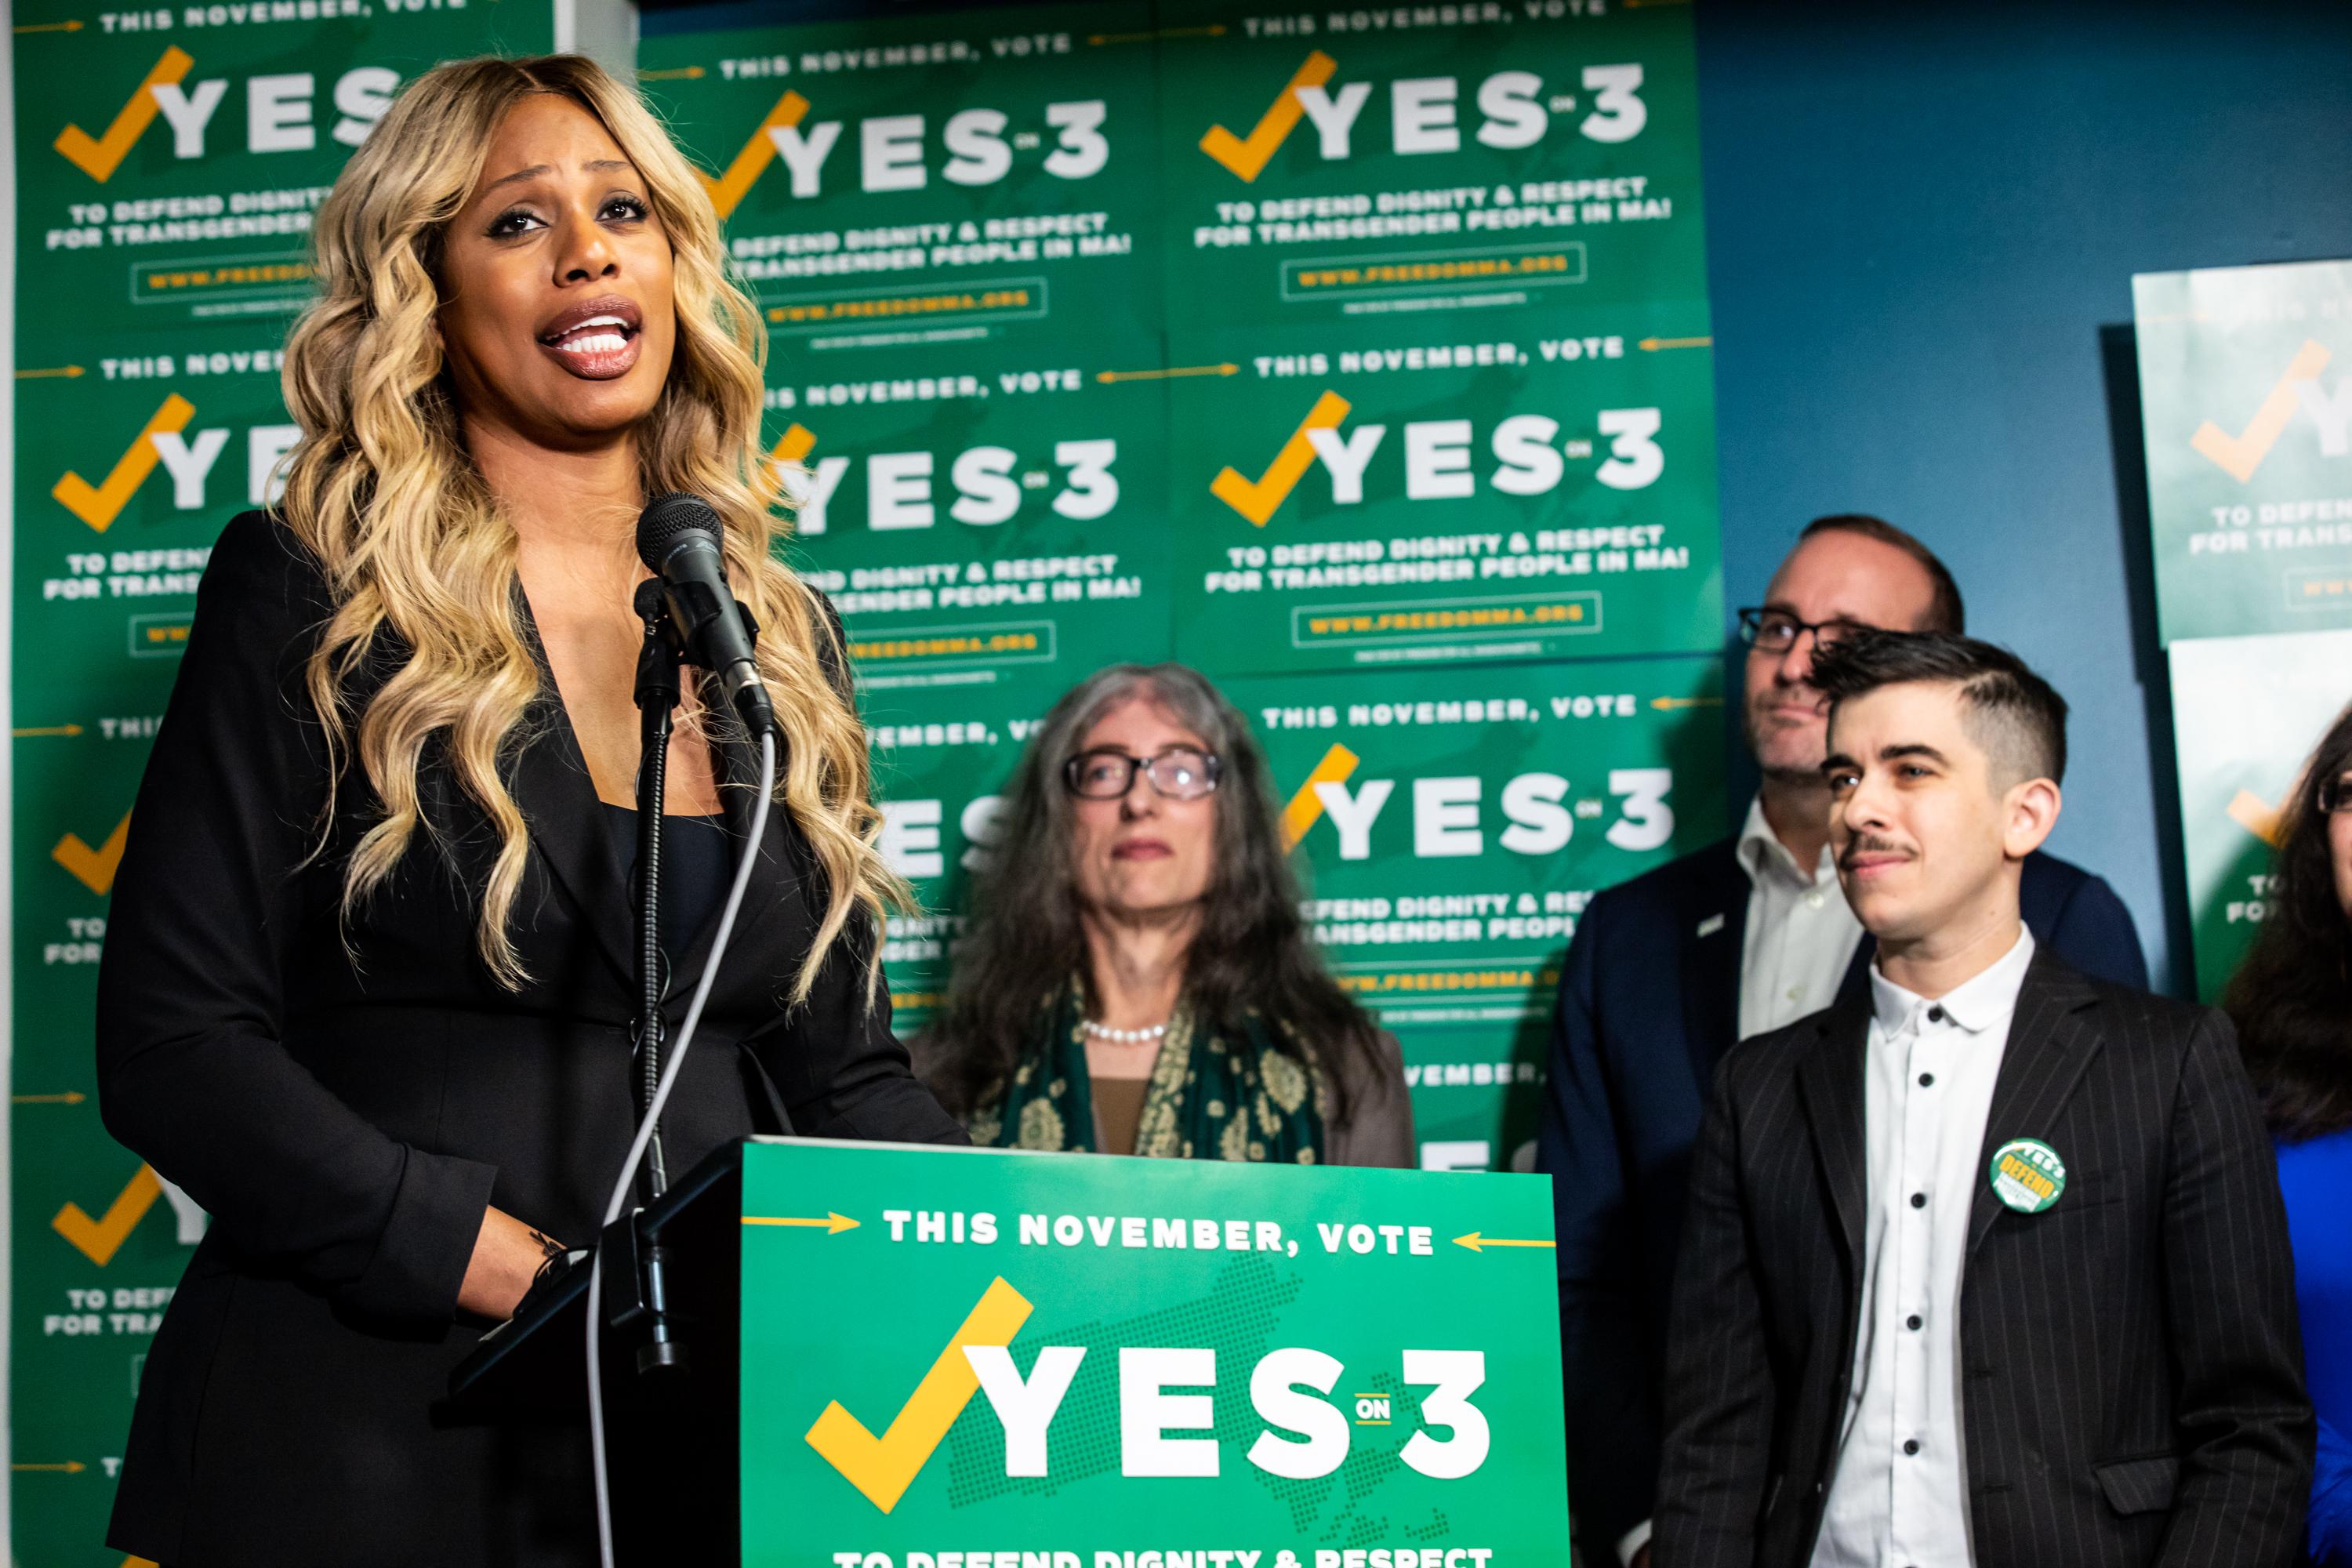 Laverne Cox speaks at a lectern with other activists.